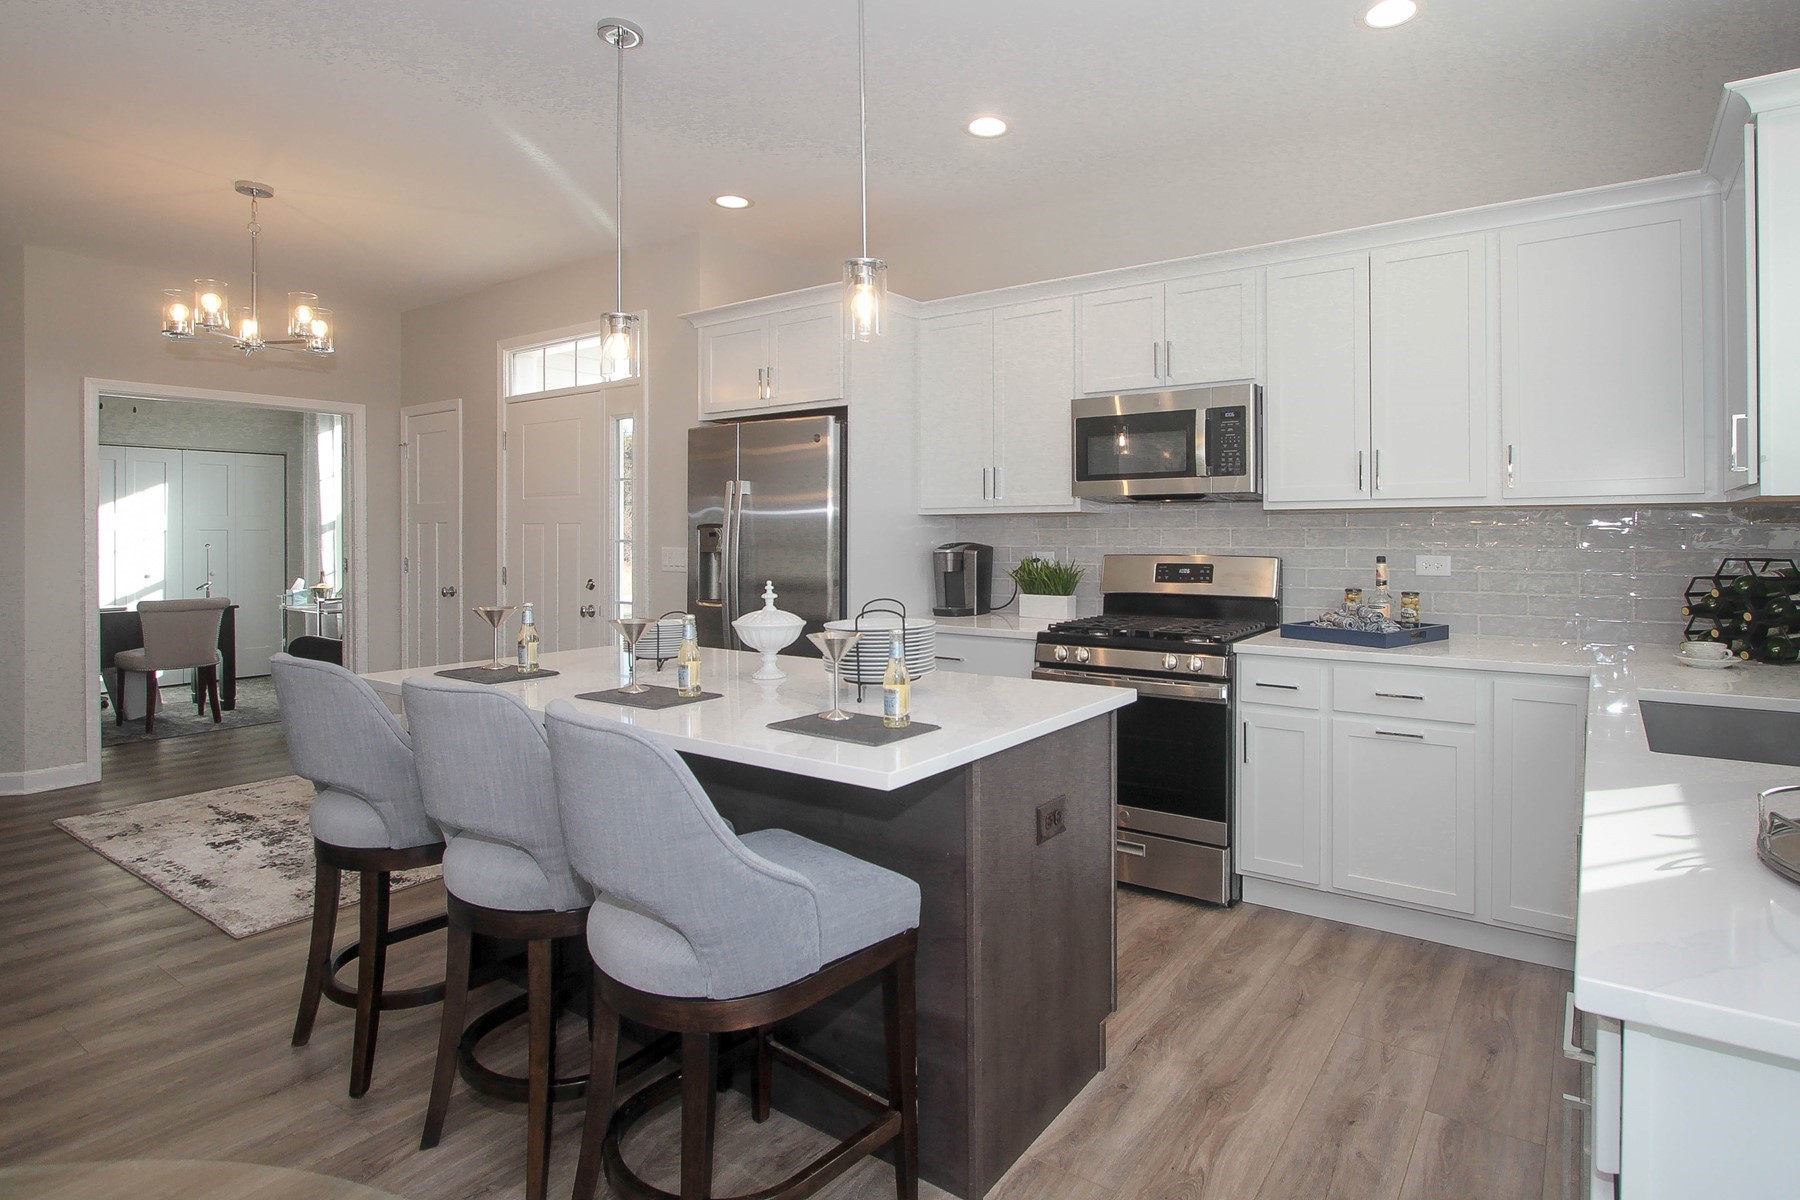 A magnificent kitchen is one of the many modern features showcased in the ranch duplexes at The Villas at Madison Lane.